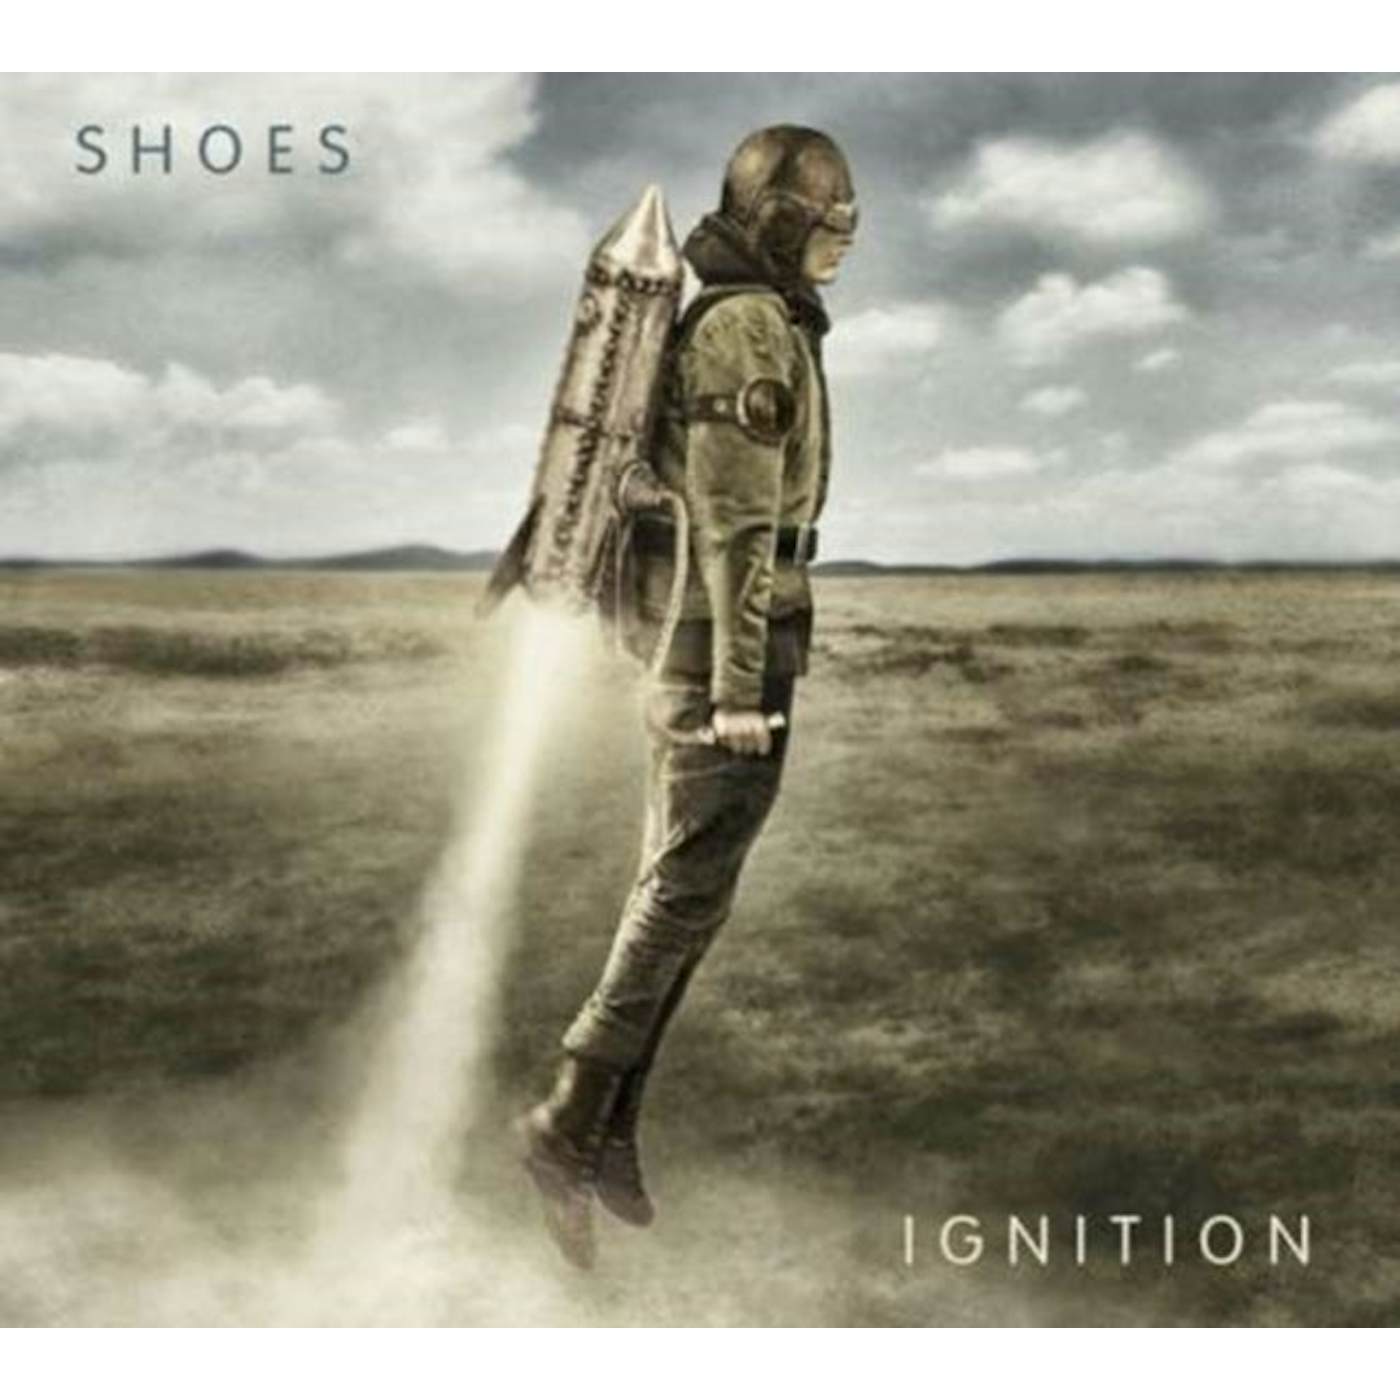 Shoes CD - Ignition